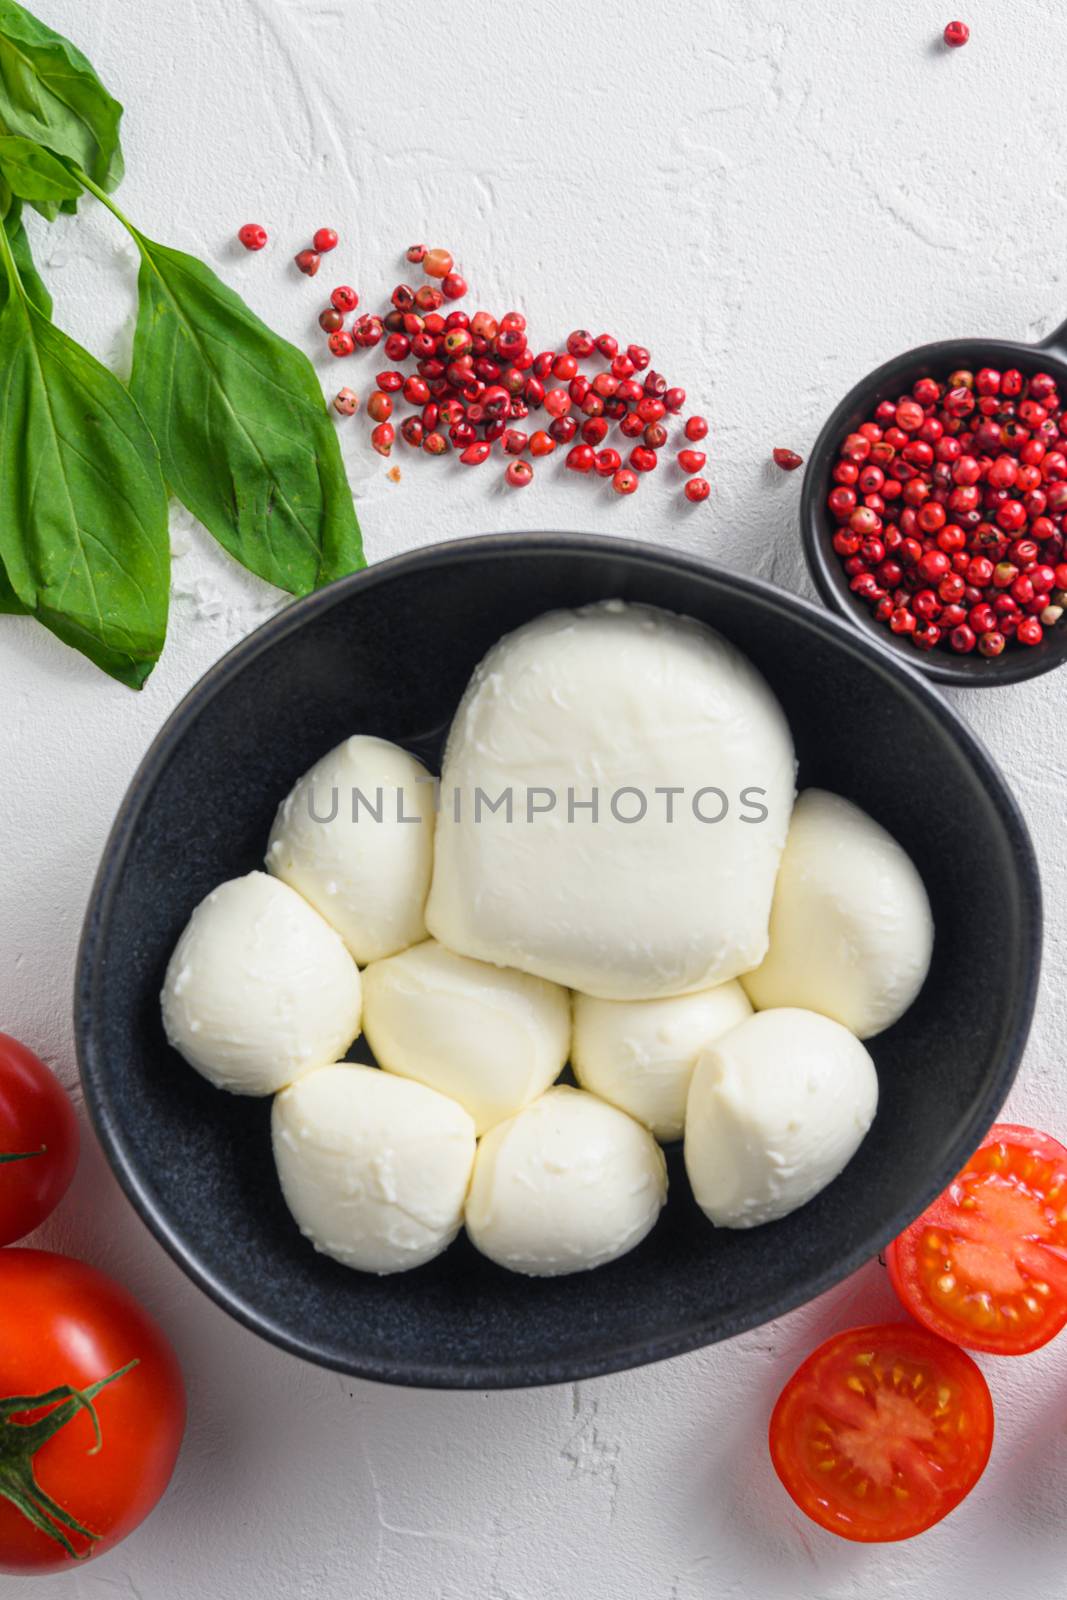 Mozzarella cheese in black bowl, basil tomato cherry balsamic black slate stone copy space. Ingredients for Caprese salad on white background close up vertical.